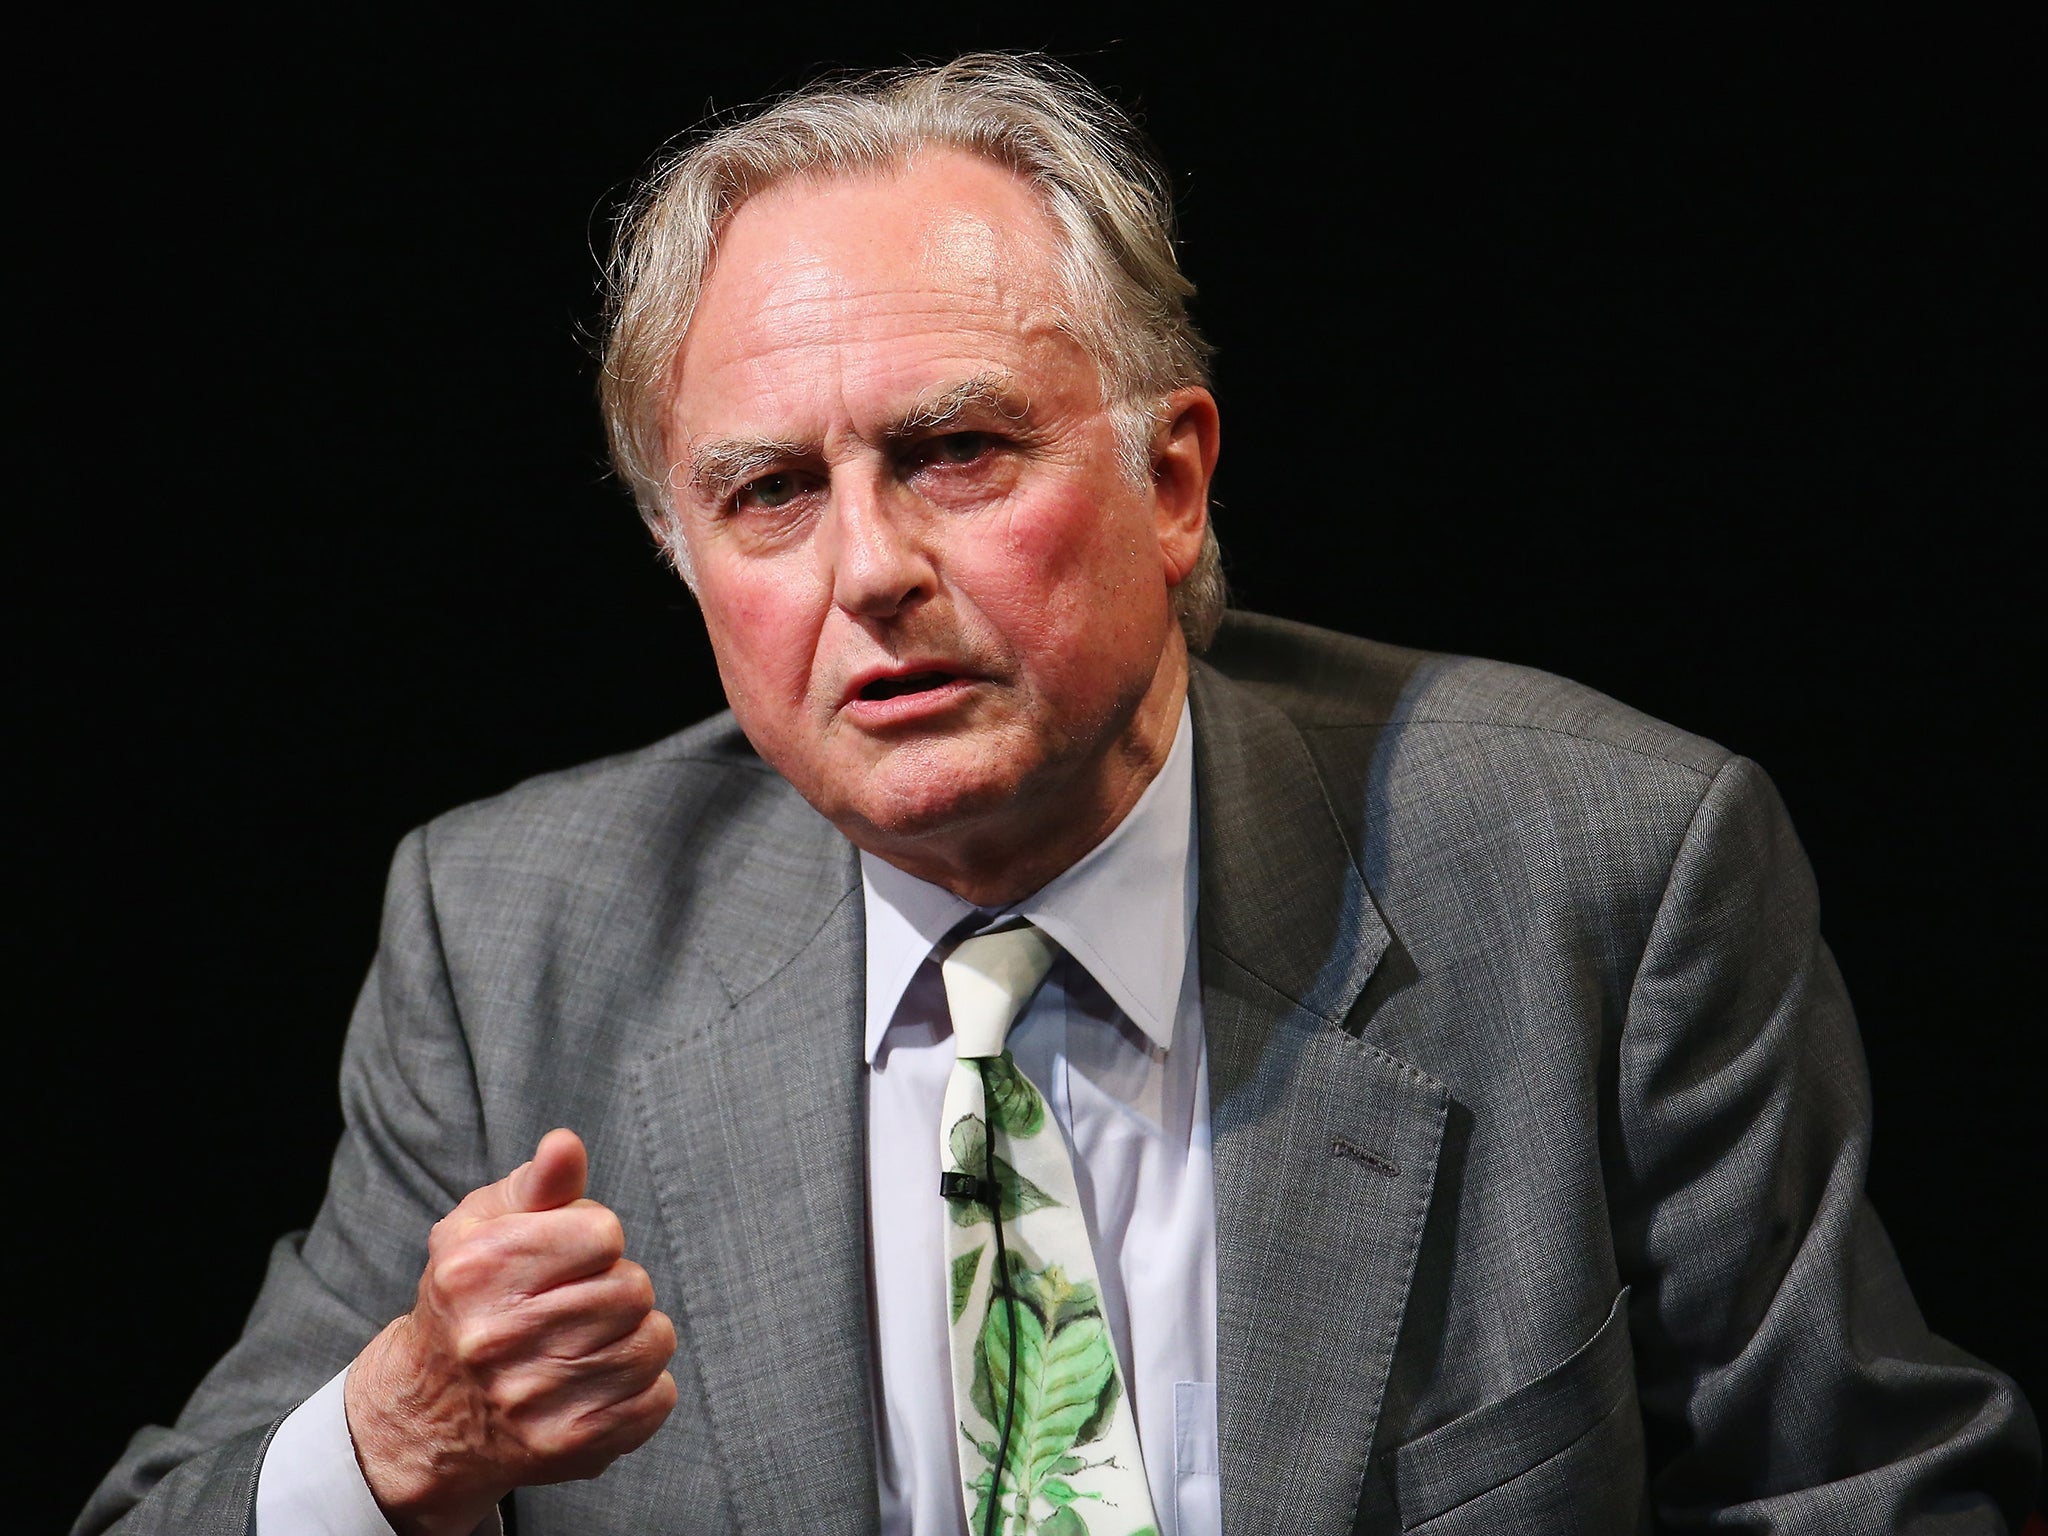 Dawkins also said he believed migrants from Syria and Iraq who have stopped believing in Islam should be prioritised in the immigration system